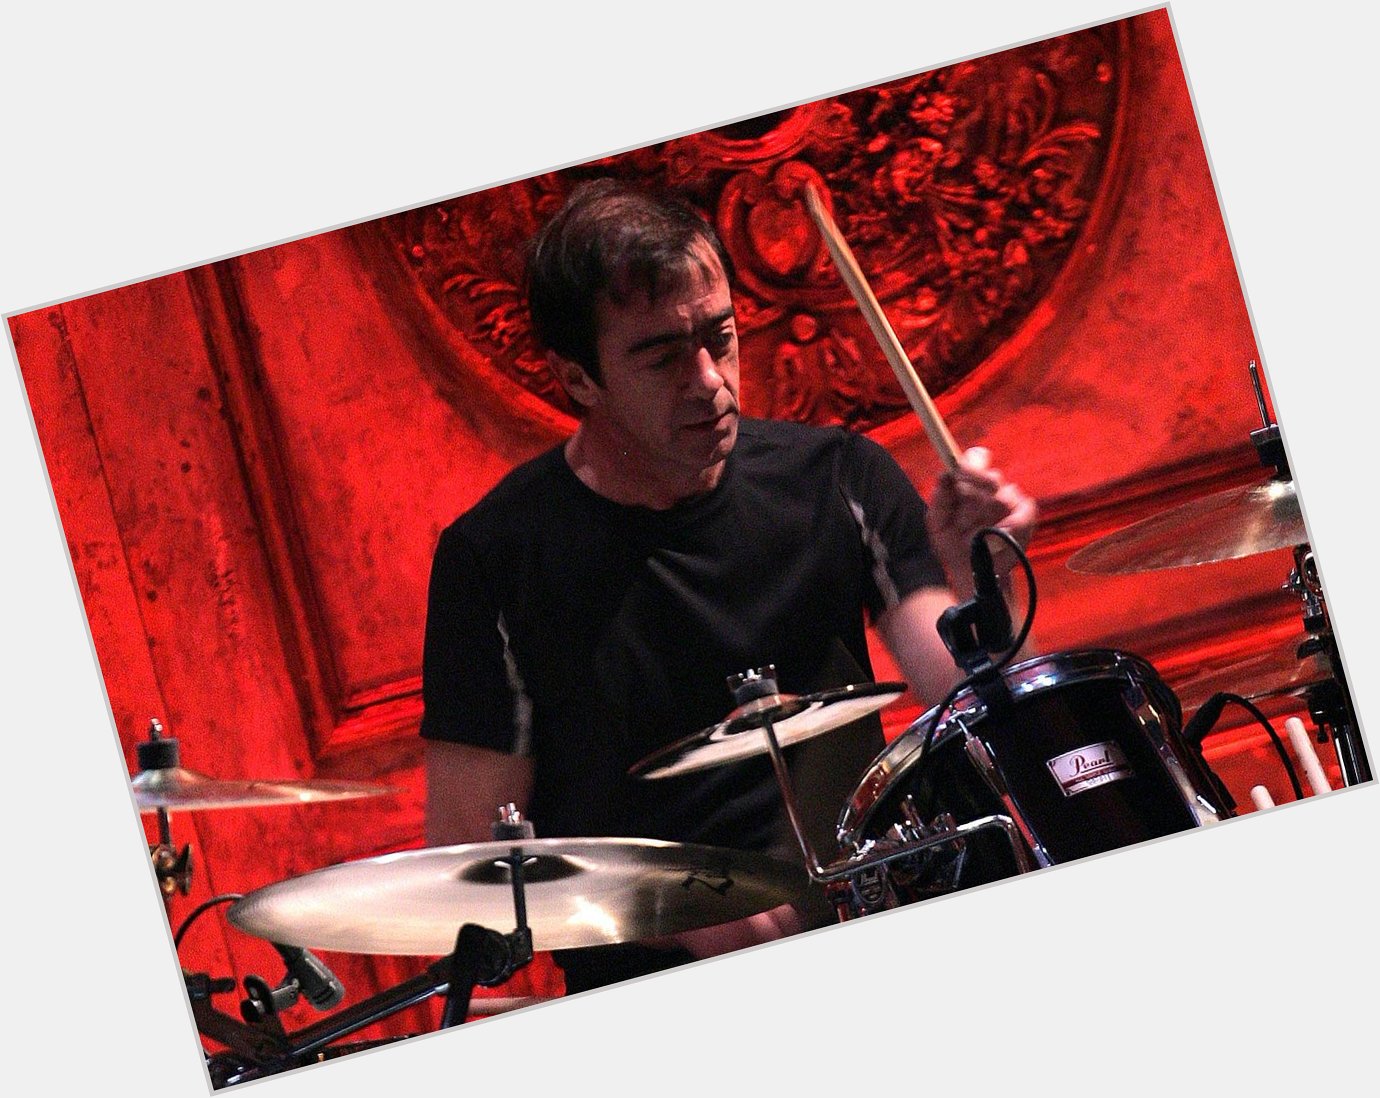 Happy birthday to longtime REM drummer Bill Berry! 